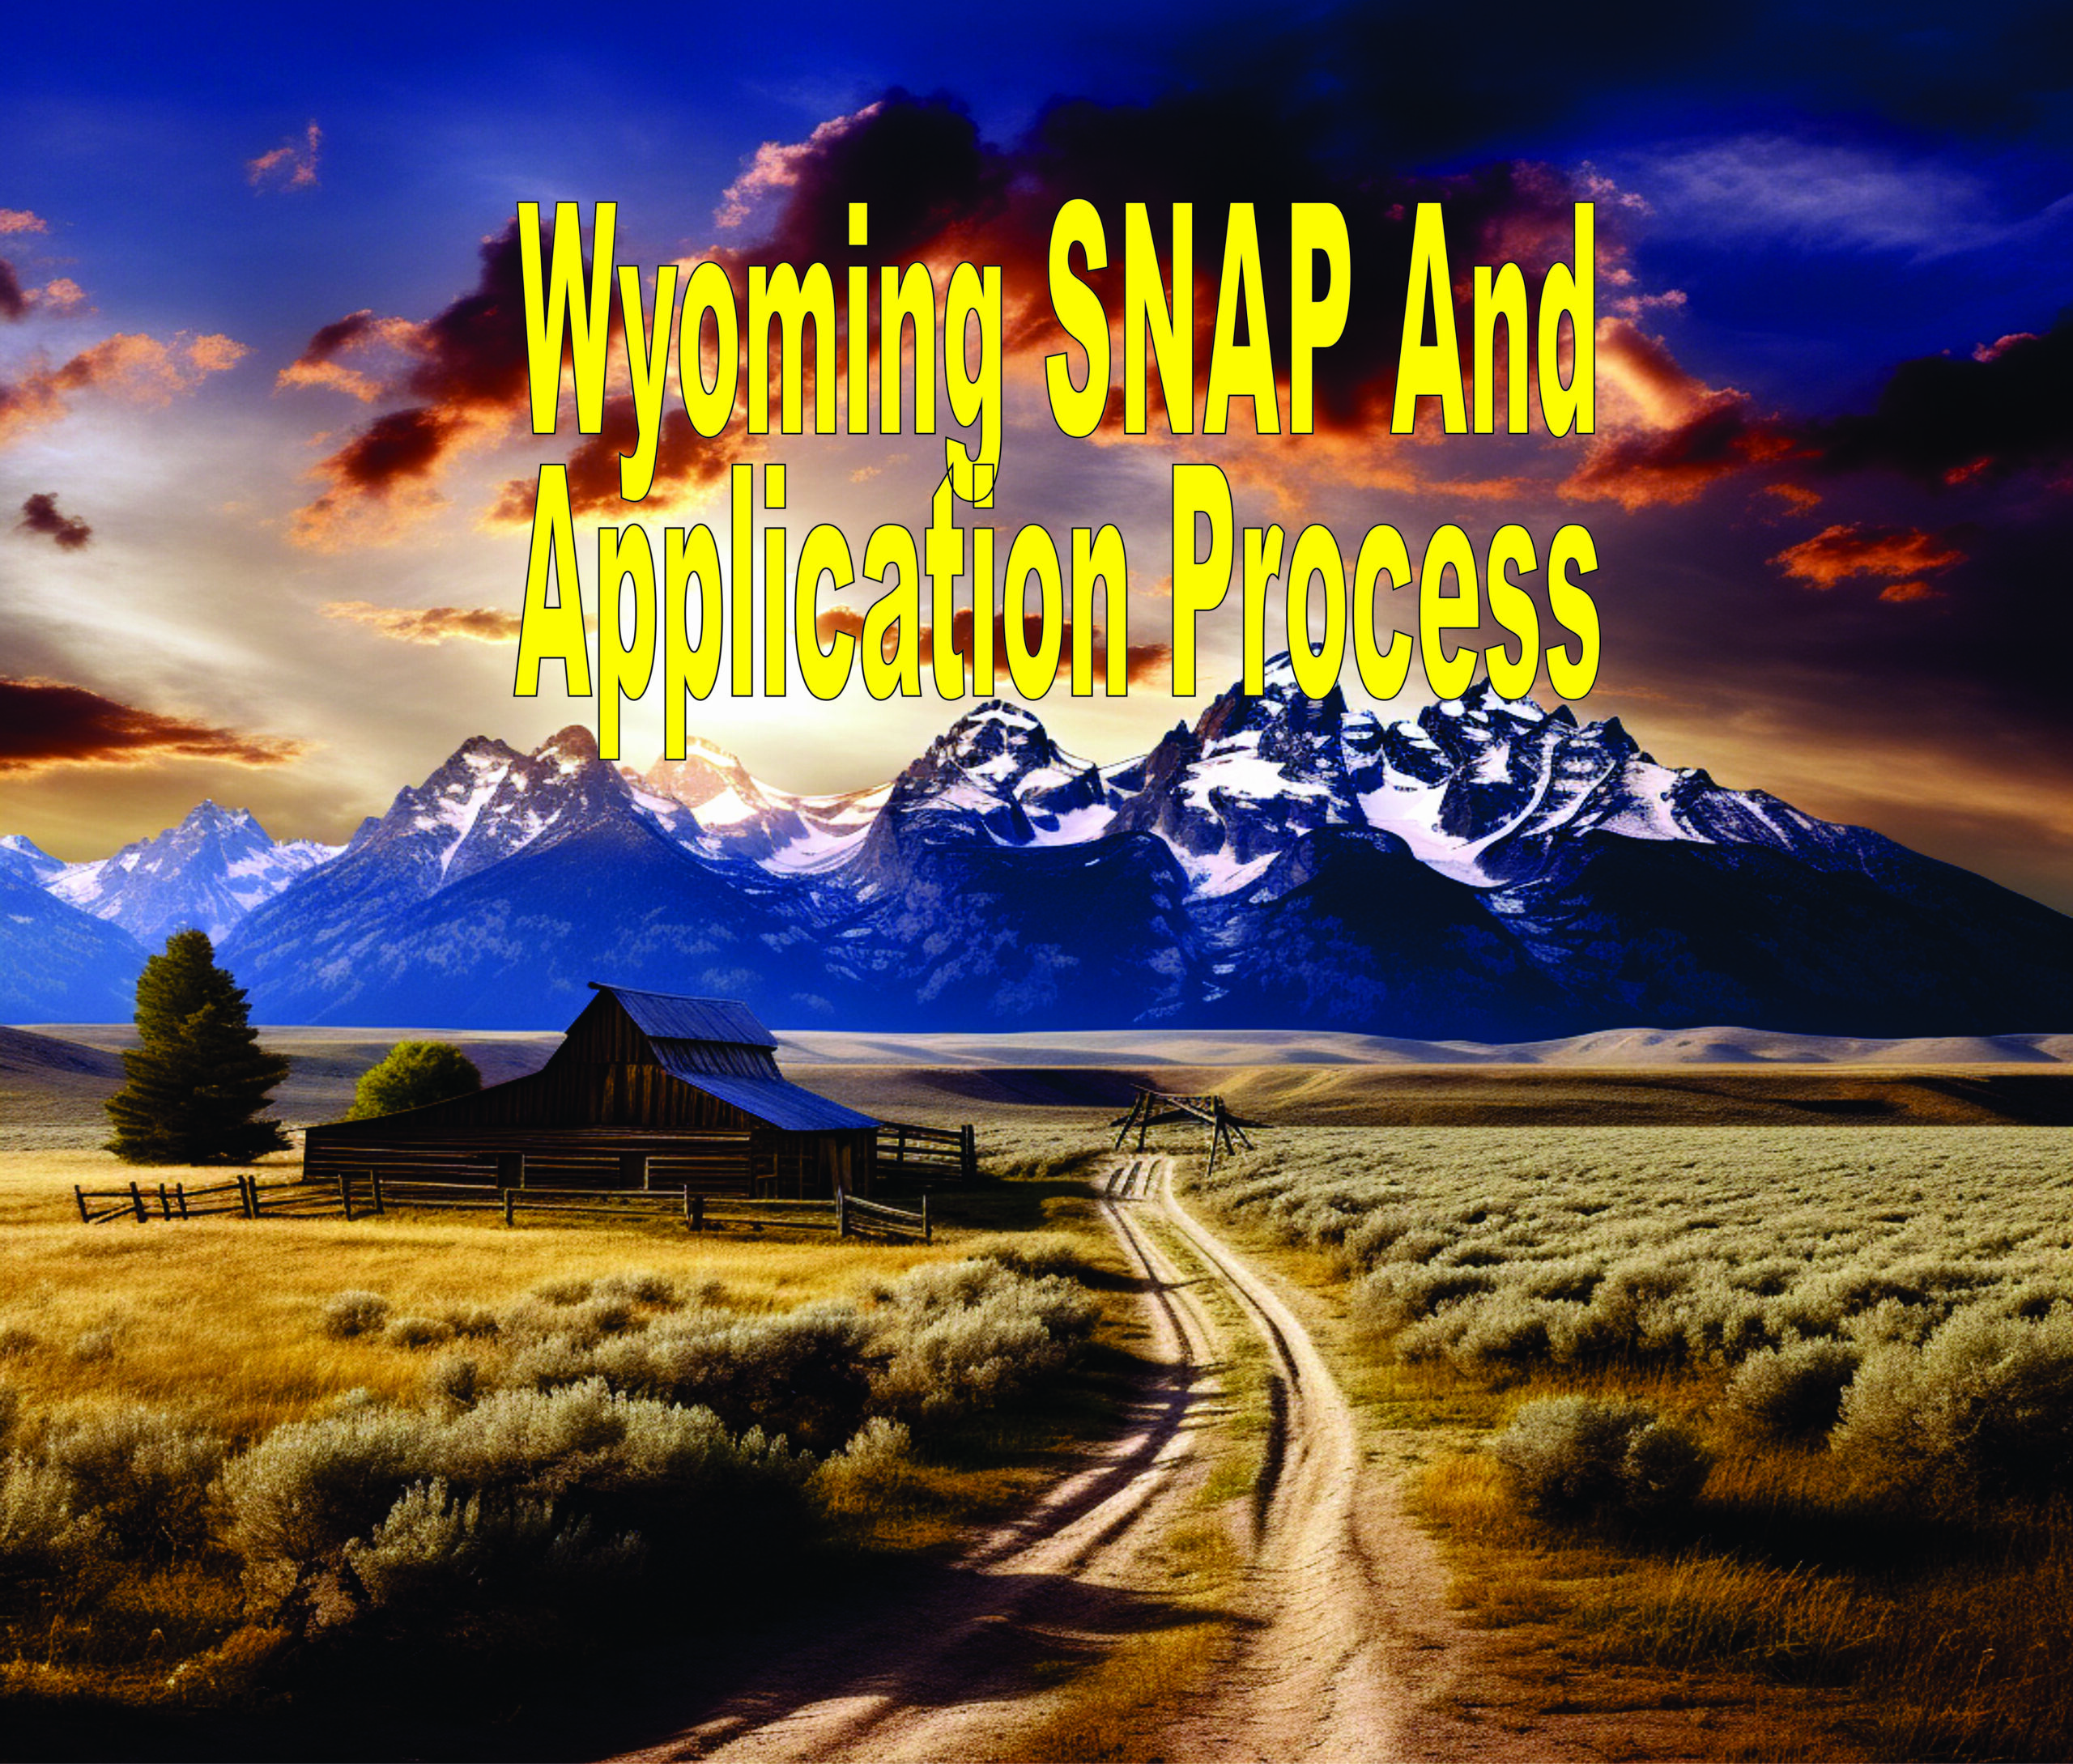 Wyoming Snap And Application Process